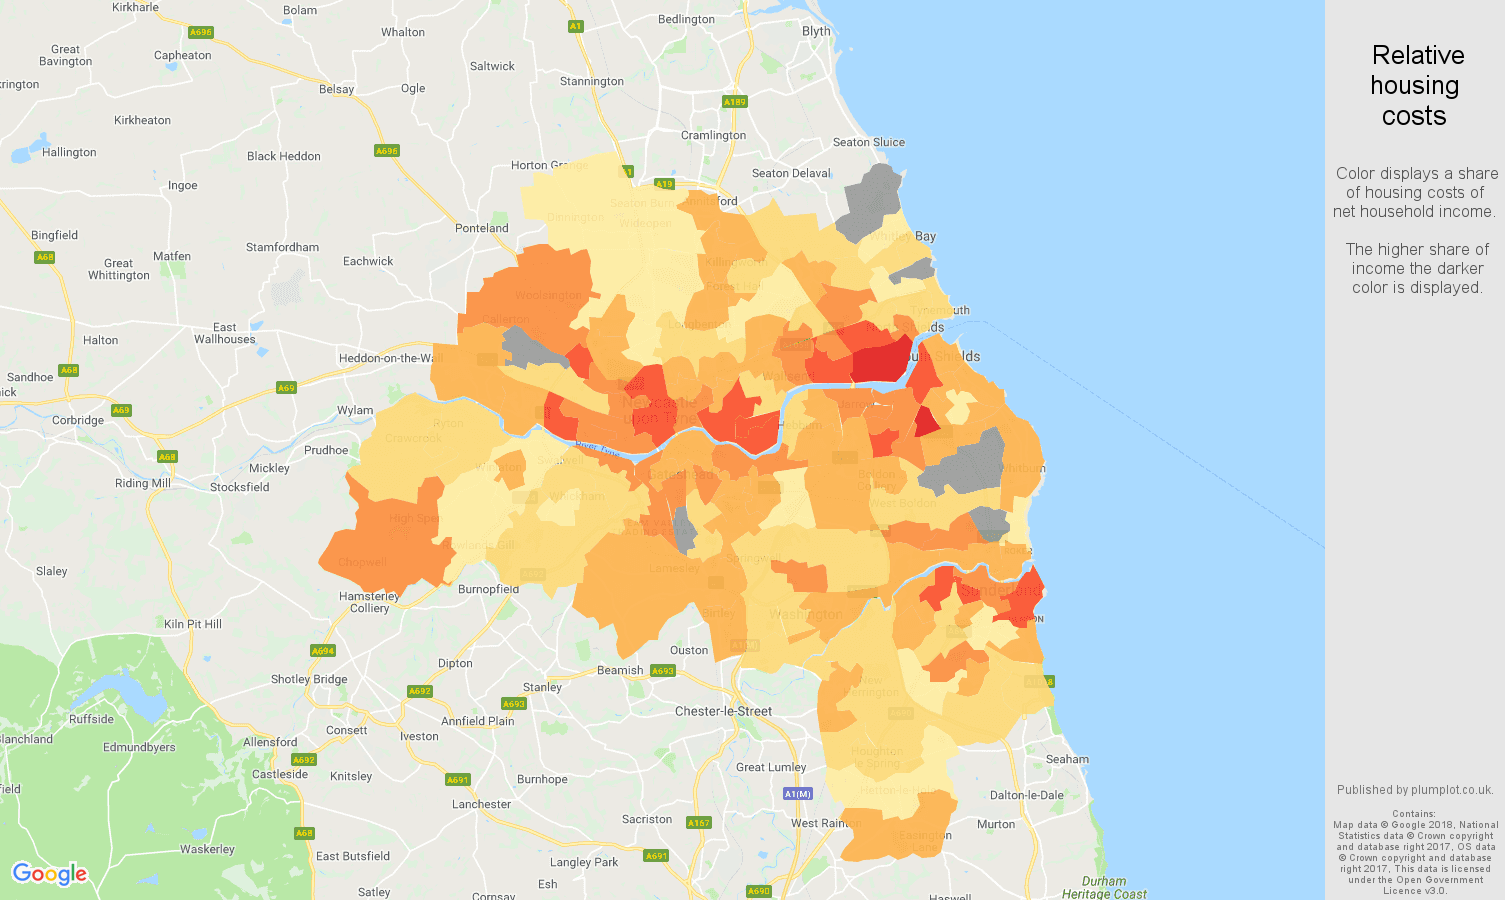 Tyne and Wear relative housing costs map